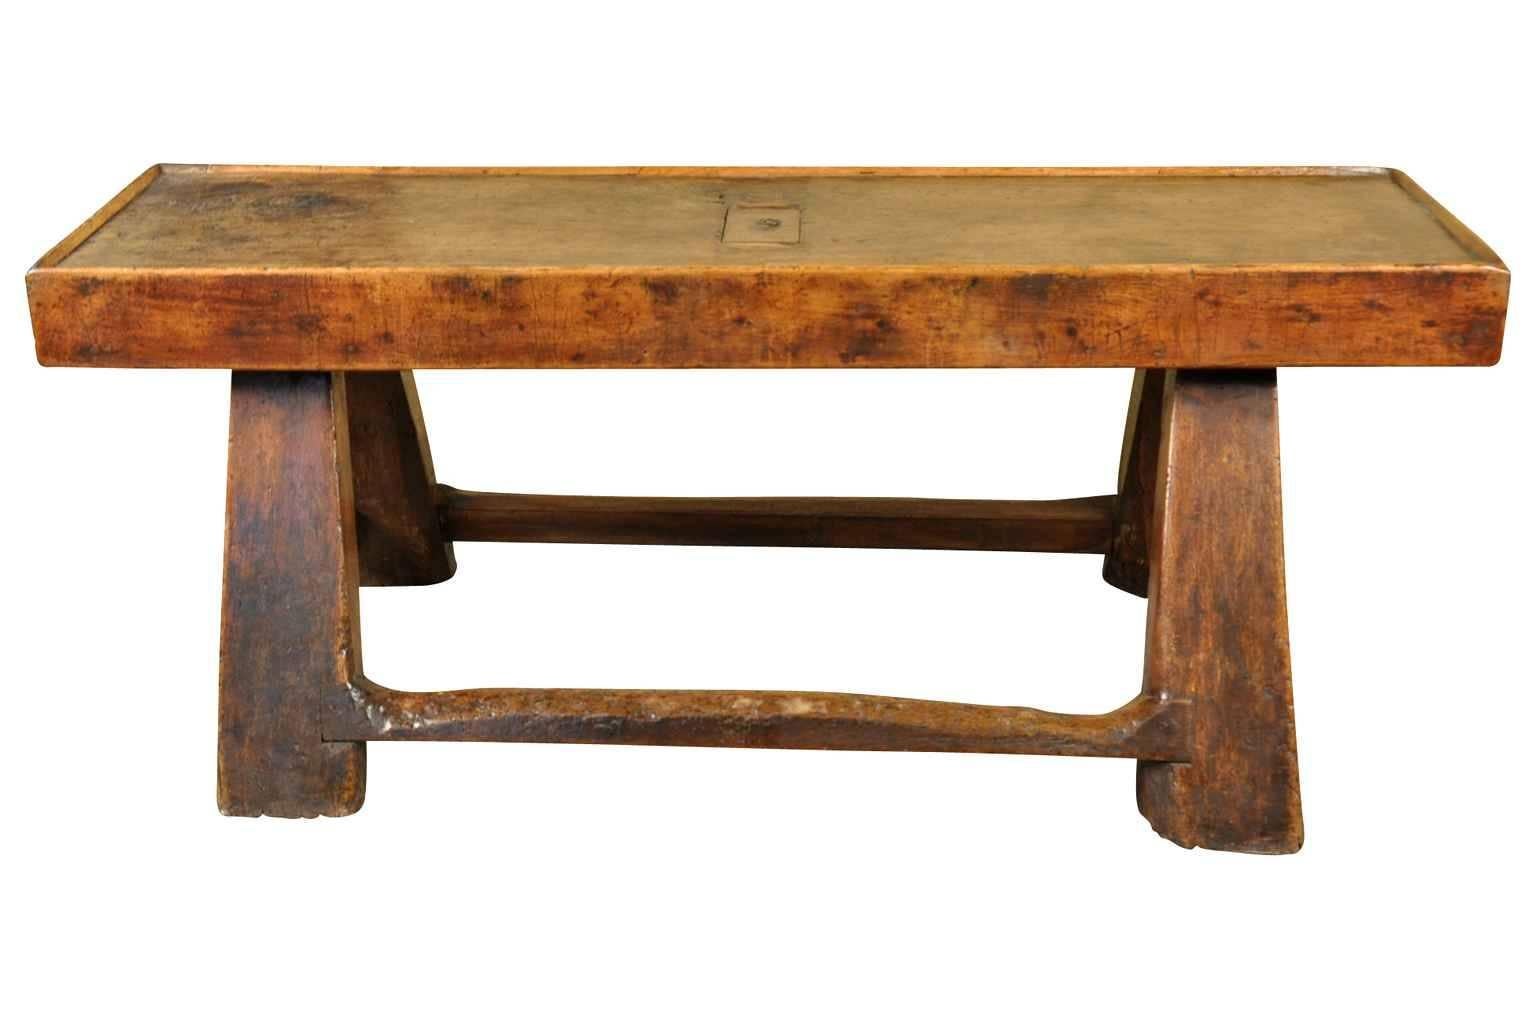 A terrific early 19th century Northern Italian work table in walnut. Fabulous patina. Ideal as a coffee table. The depth of the top surface is 16 7/8